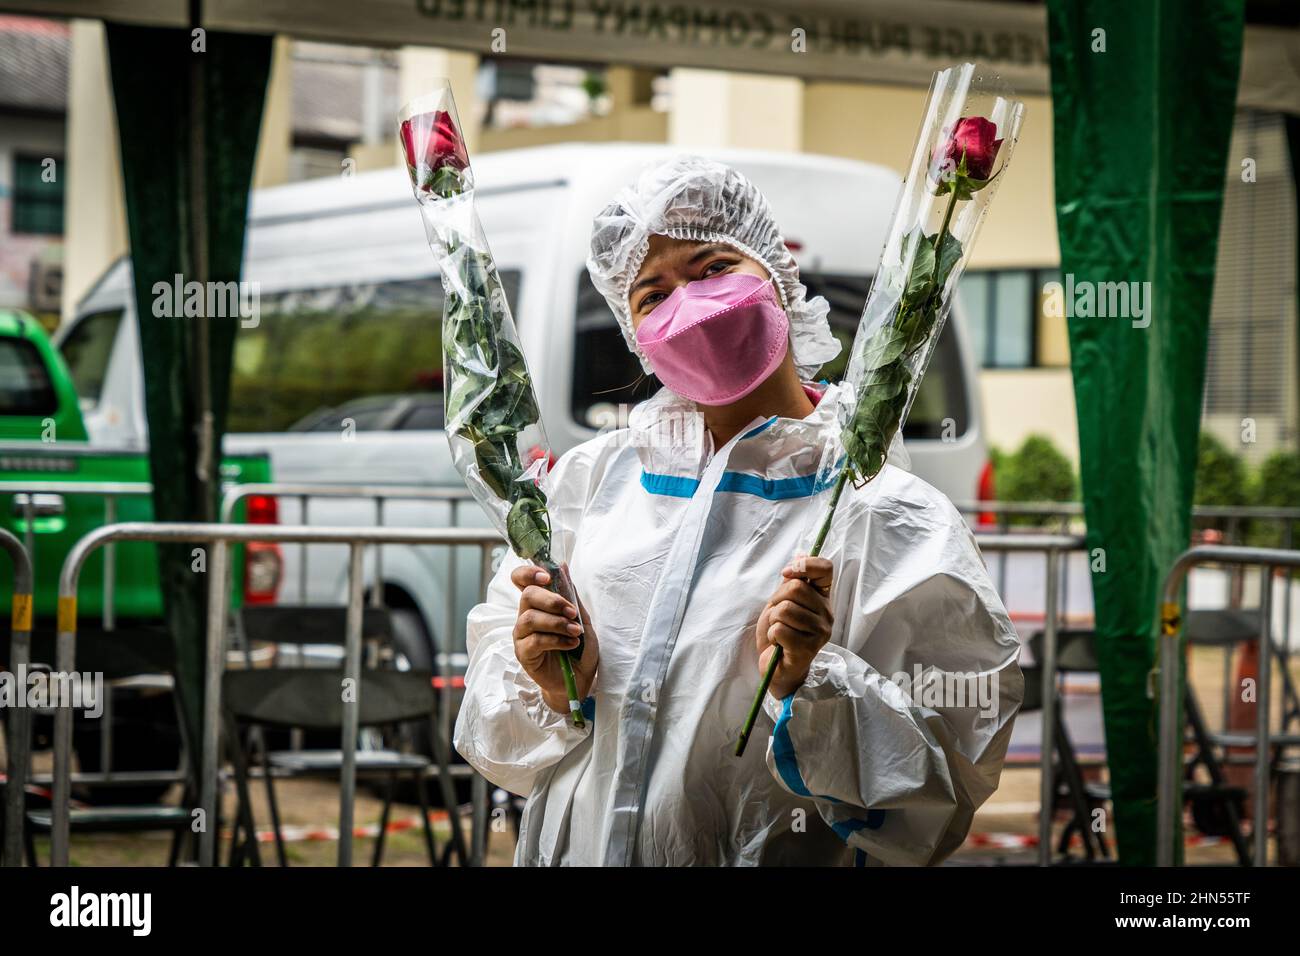 Bangkok, Thailand. 14th Feb, 2022. A medical worker dressed in full PPE poses with roses in front of a mass marriage event on Valentine's Day in Bangkok.Couples gather to legally register their marriage during the 'Lover New Normal @ Bangrak' mass marriage event on Valentine's Day in Bangkok. Although it is common for people to legalize their marriage throughout the city's 50 district offices on this day every year, Bang Rak is amongst the most popular as its name resembles 'Place of Love' in the Thai Language. Credit: SOPA Images Limited/Alamy Live News Stock Photo